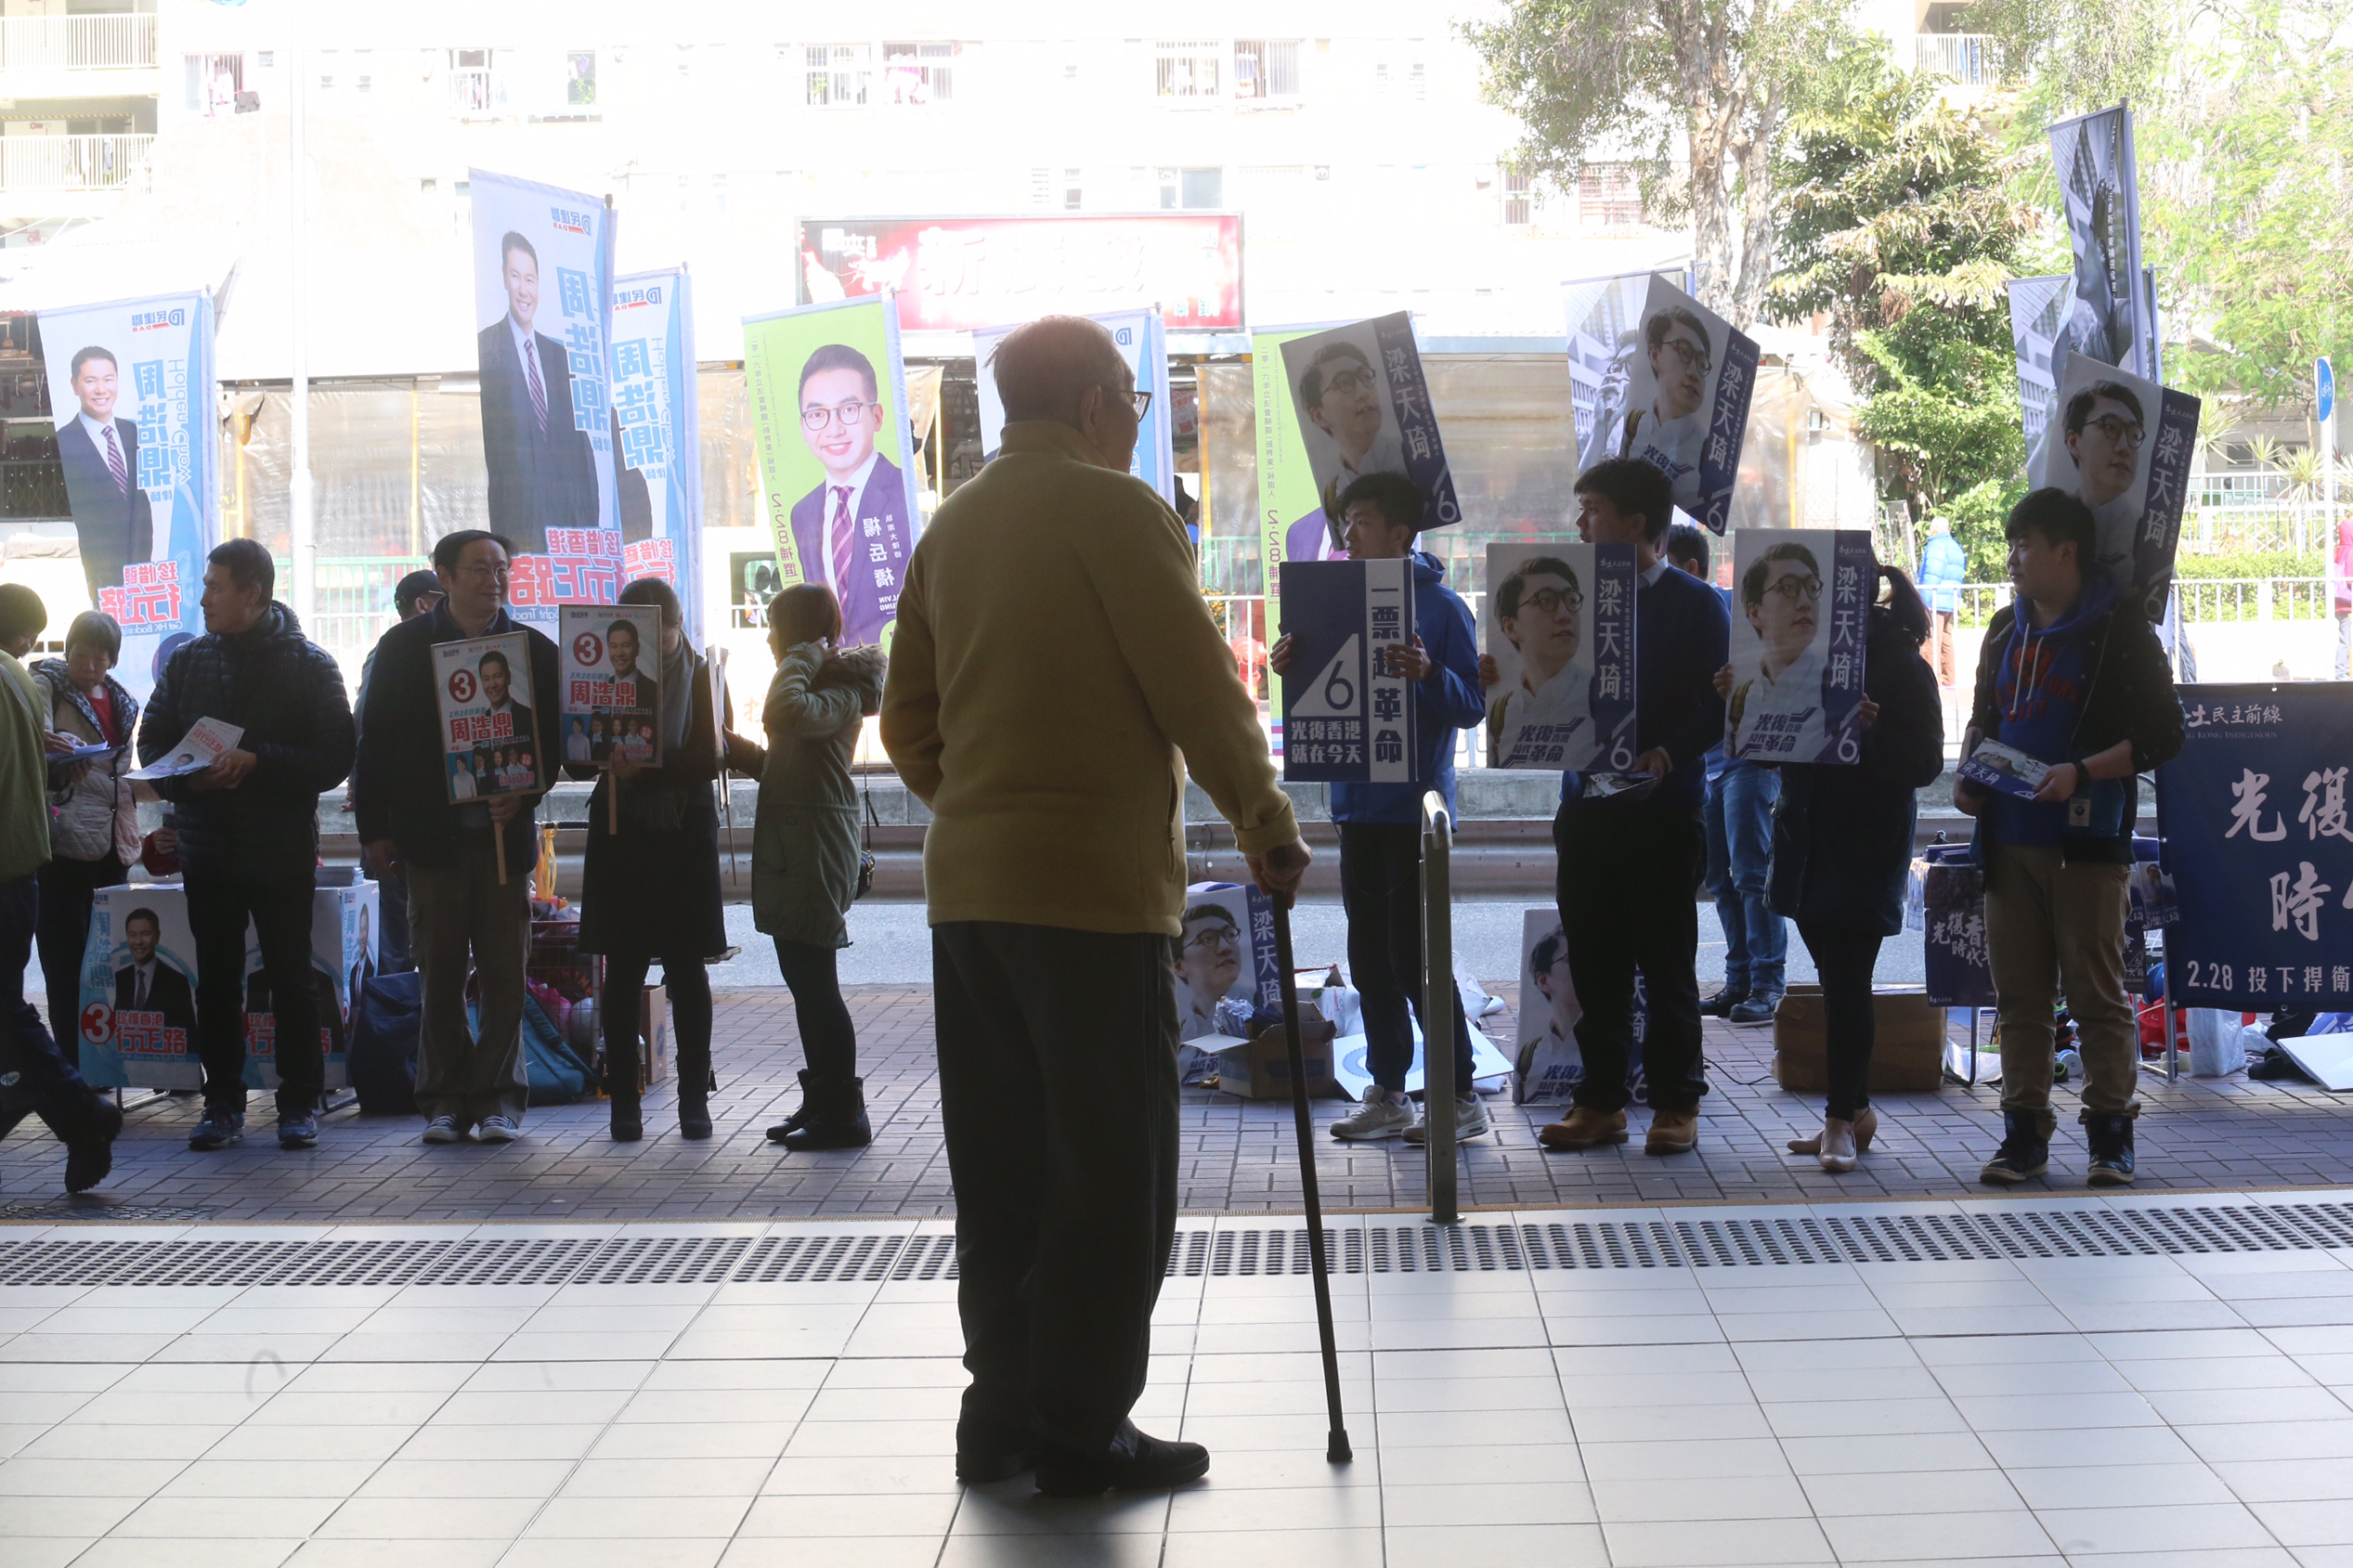 Competing for attention and votes in the New Territories East by-election. Photo: Edward Wong